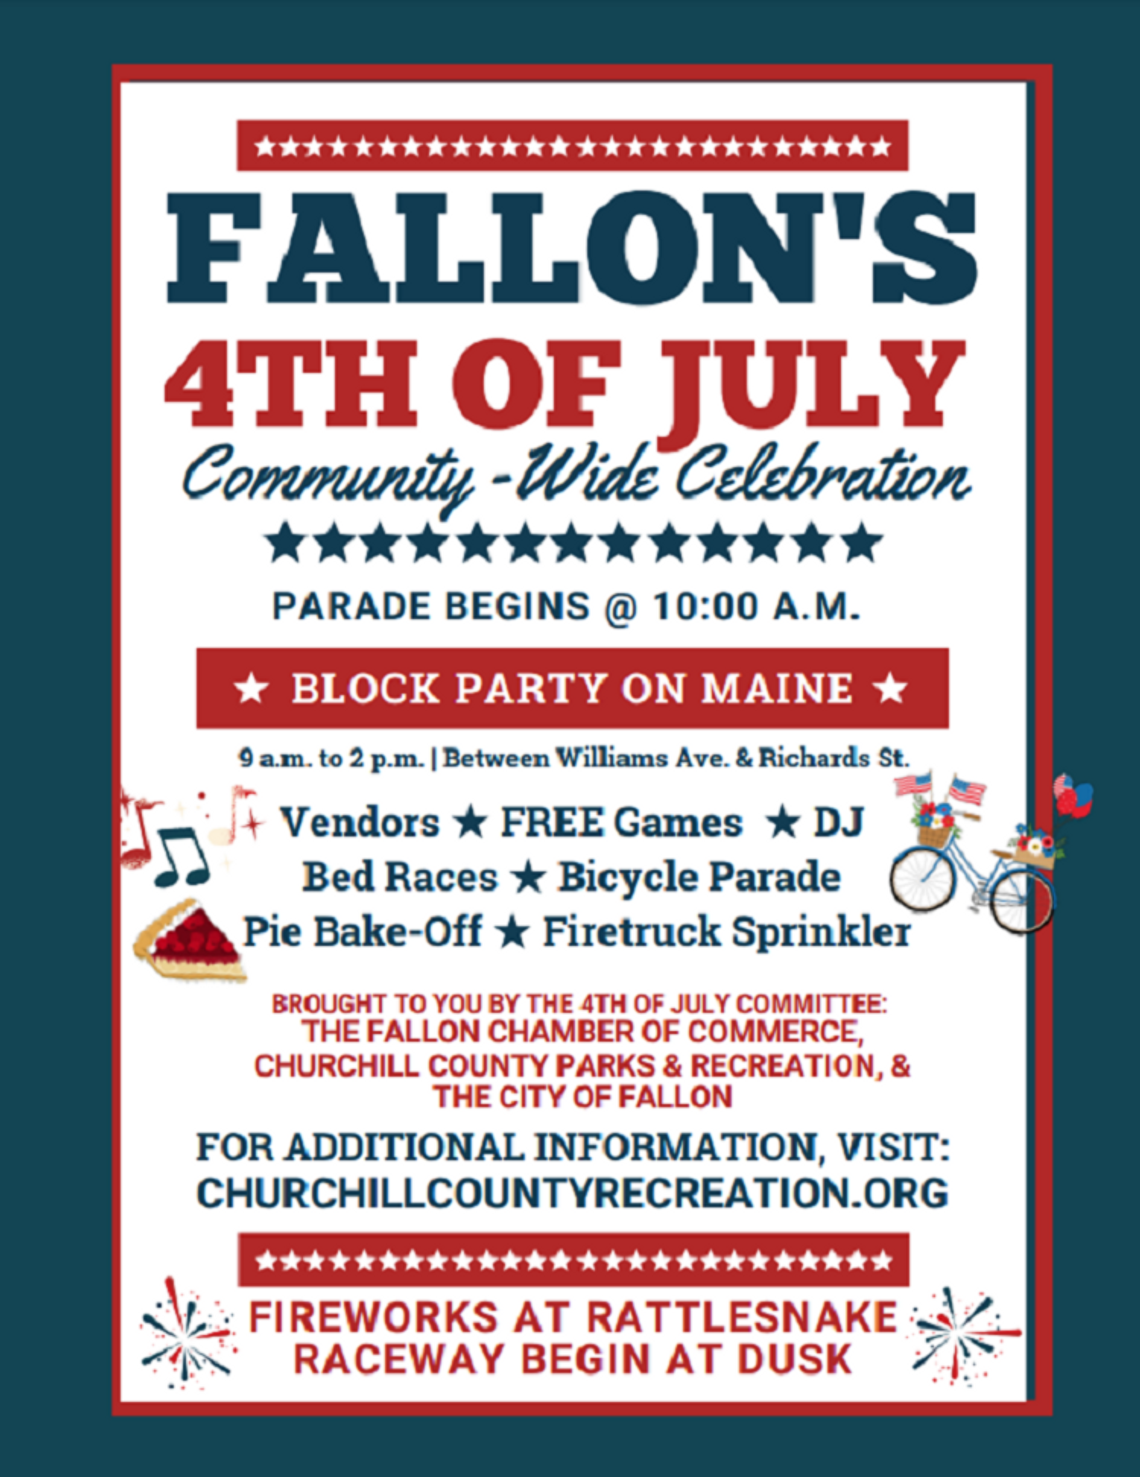 Don't Miss the Fourth of July Parade and Block Party